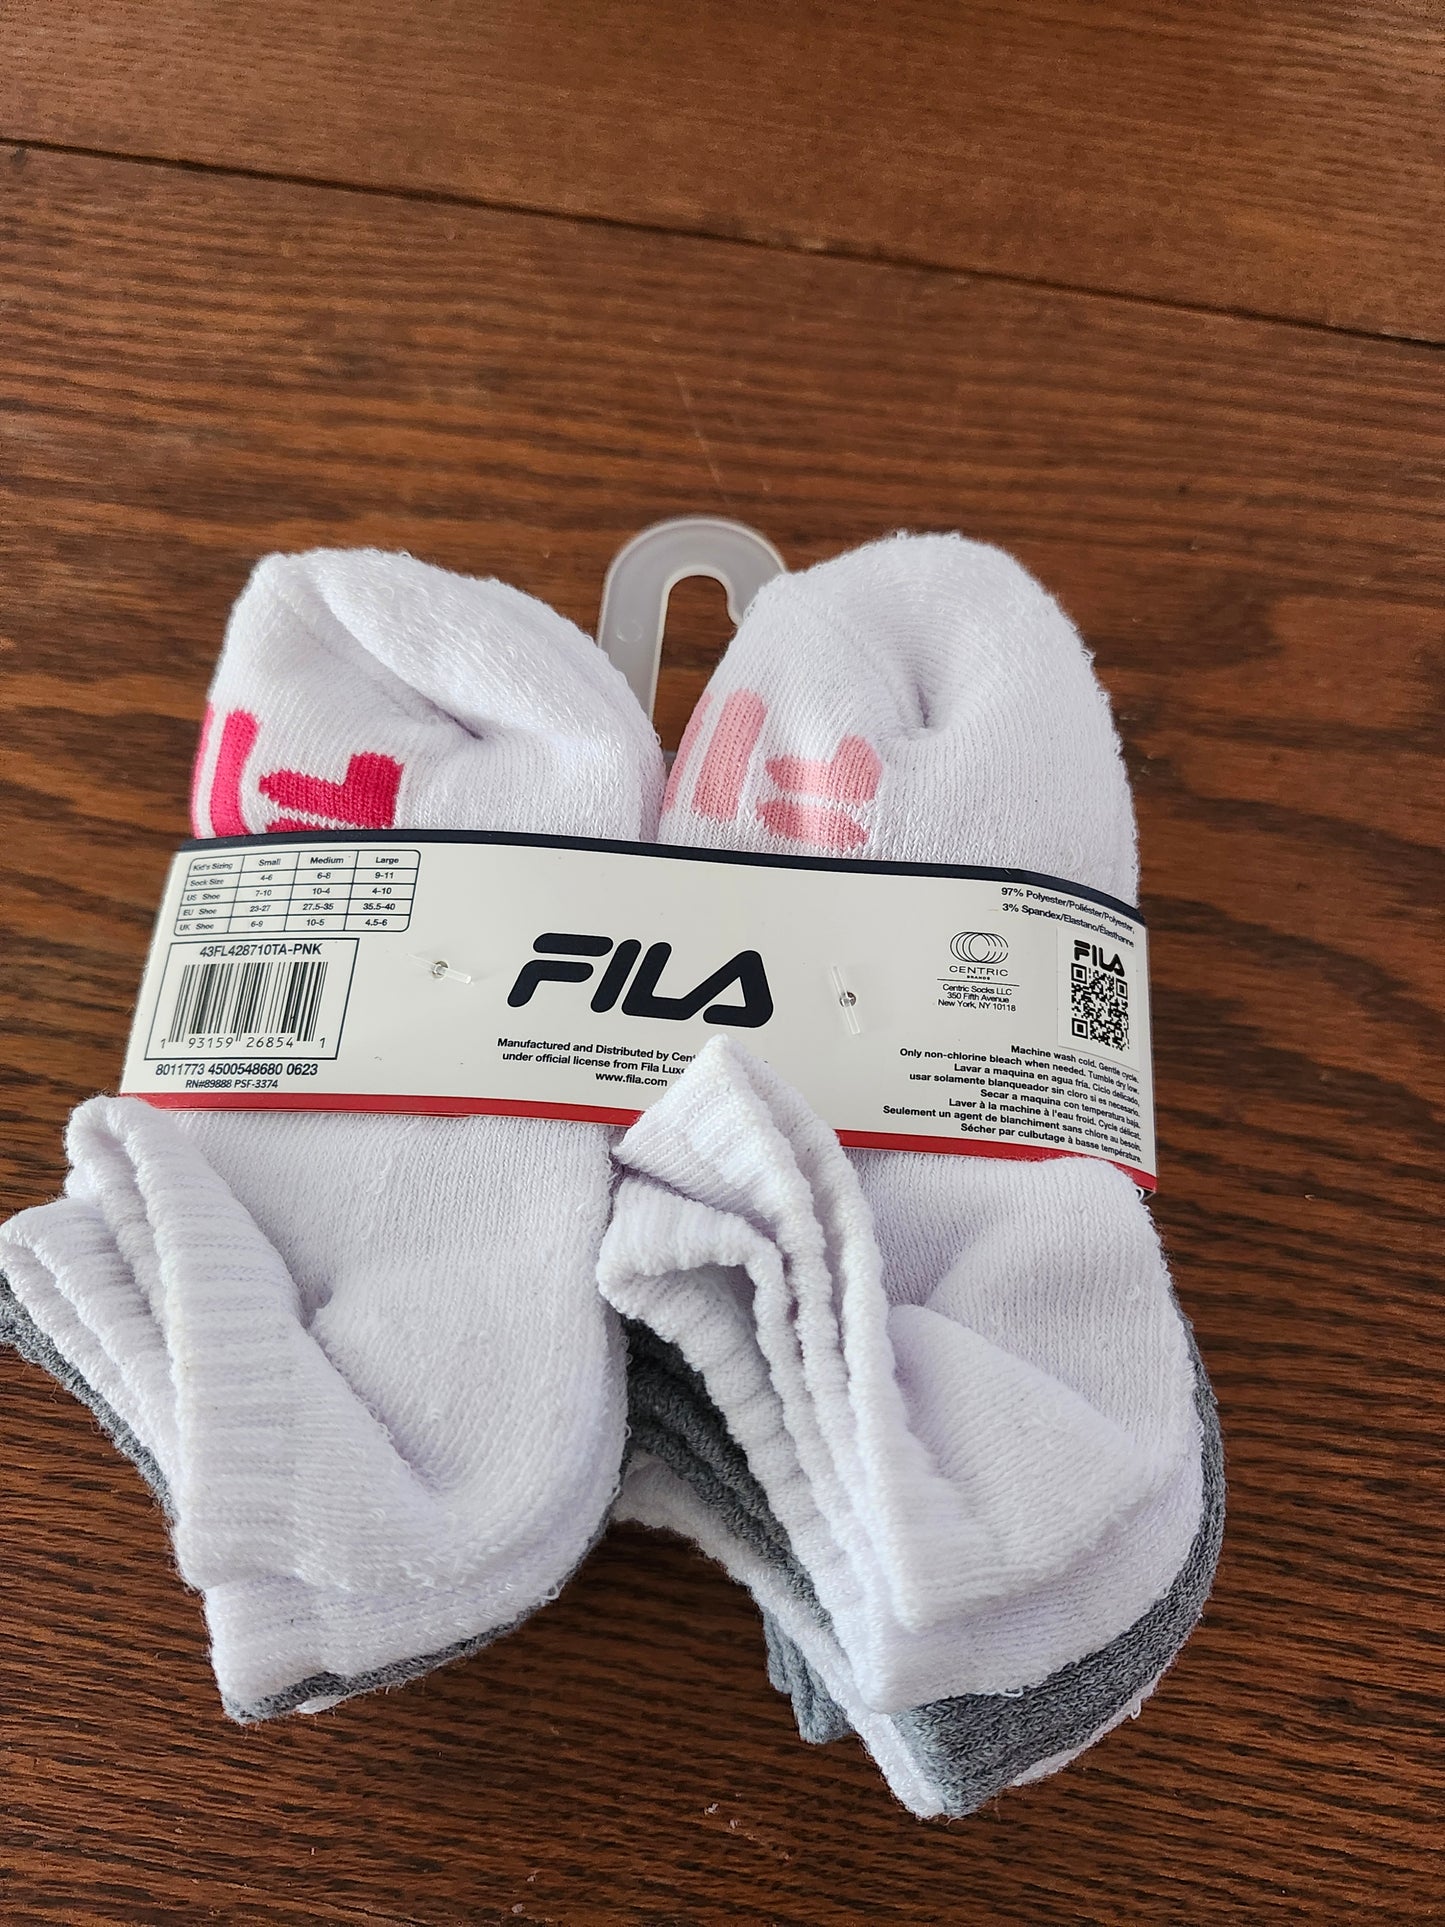 Kids Unisex No Show Fila Socks 10 Pairs  "New Arrivel" Fit Shoe Size 7-10  Color Gray/White (SOLD OUT) Thanks For Your Purchase!